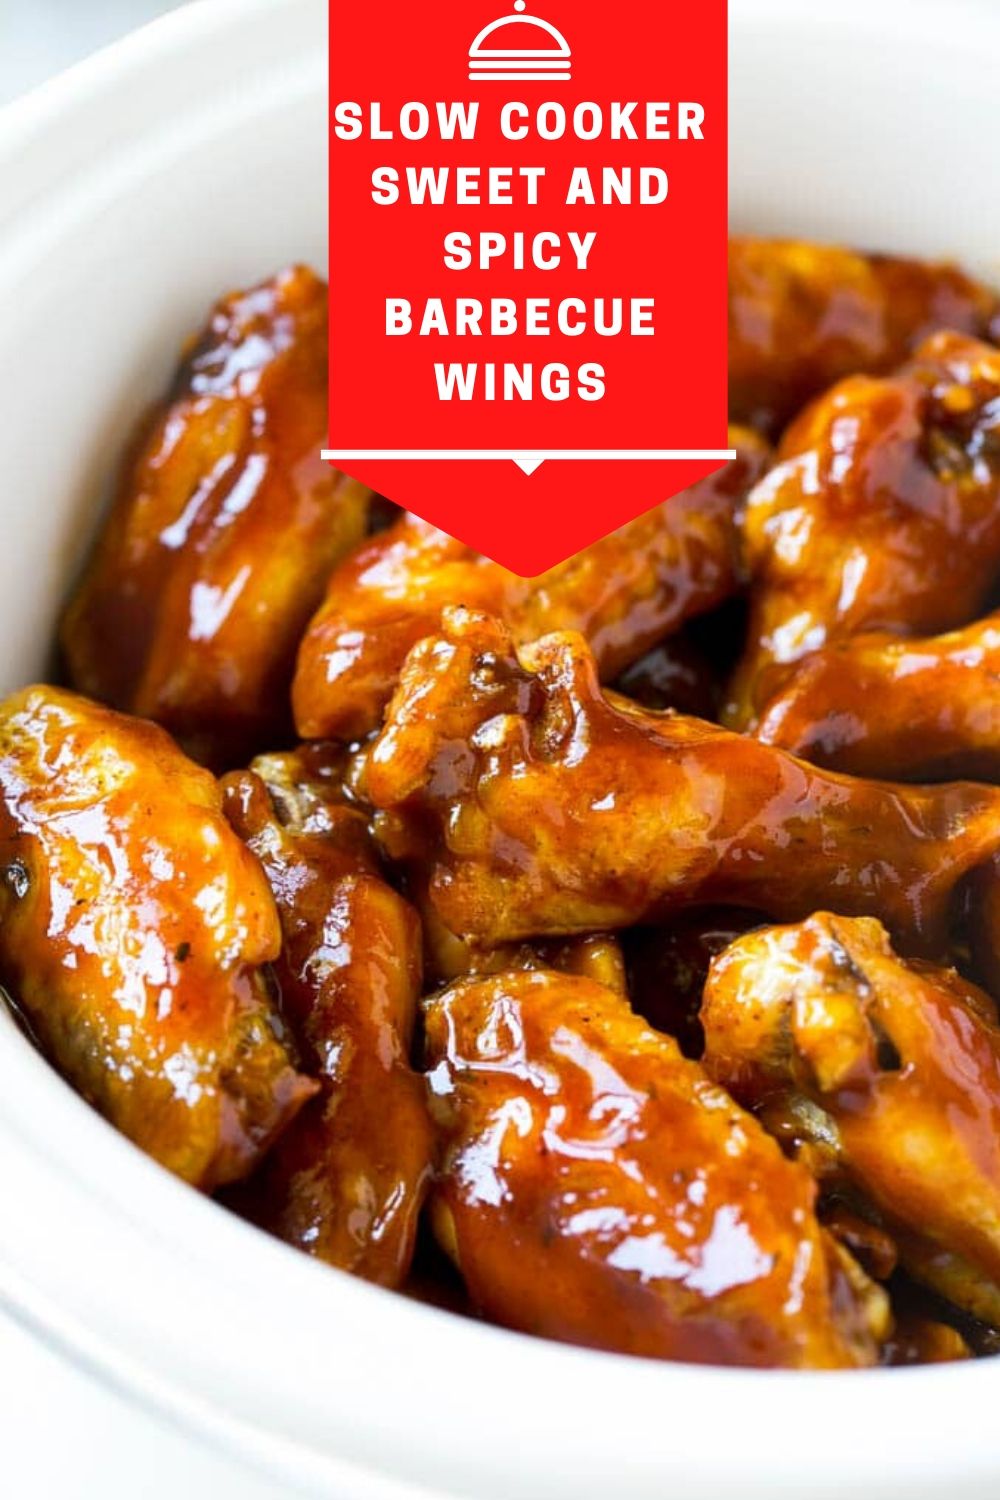 Slow Cooker Sweet and Spicy Barbecue Wings